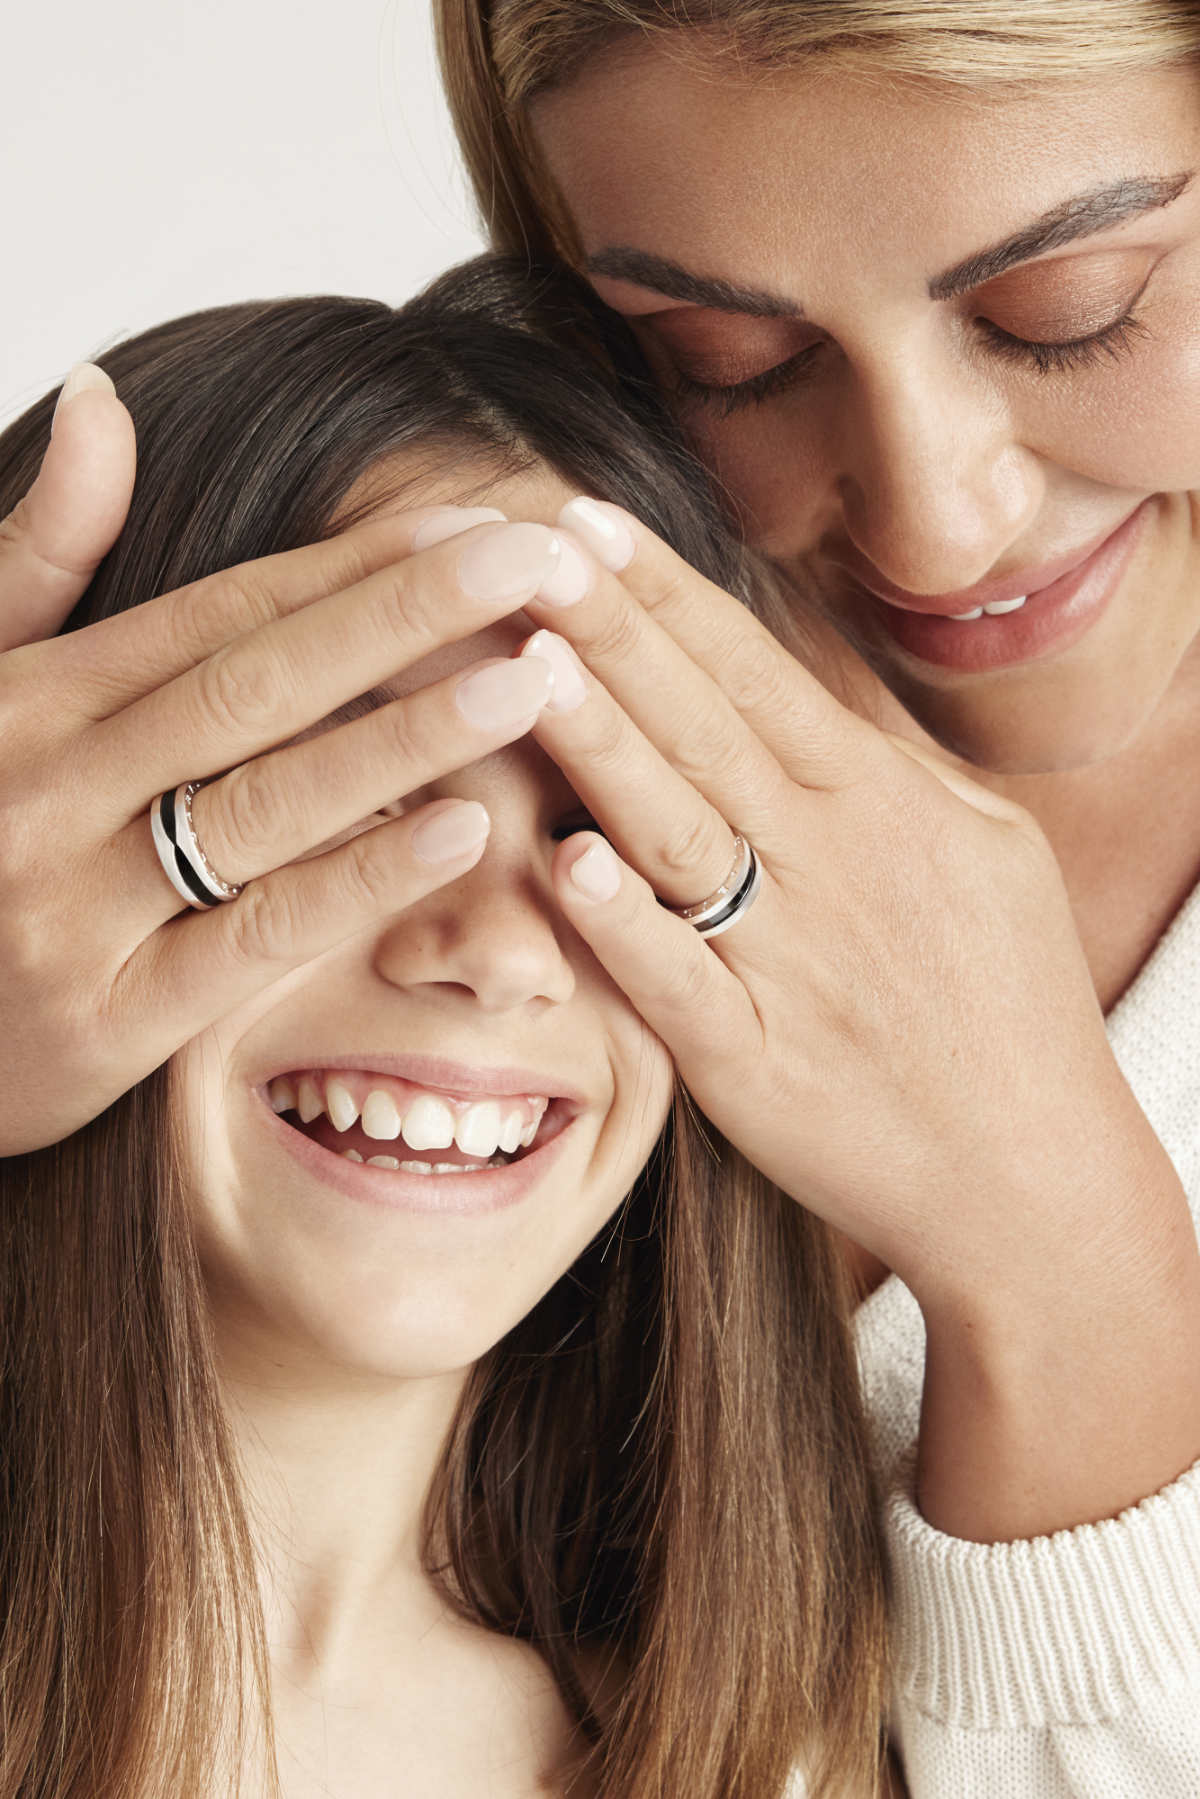 Bulgari And Save The Children Make A Special Wish For All Mothers In The World